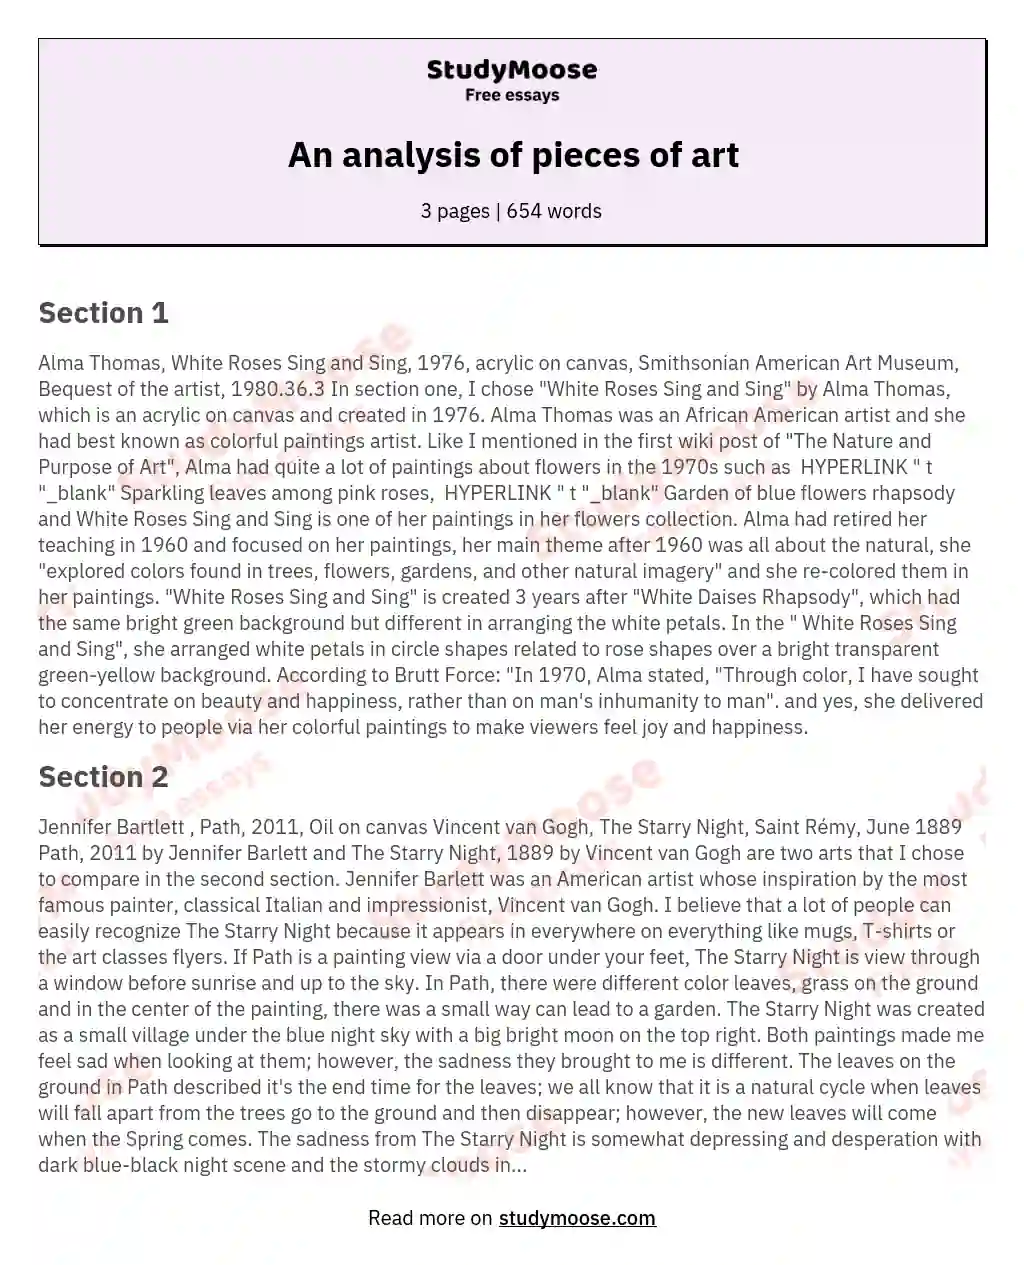 An analysis of pieces of art essay